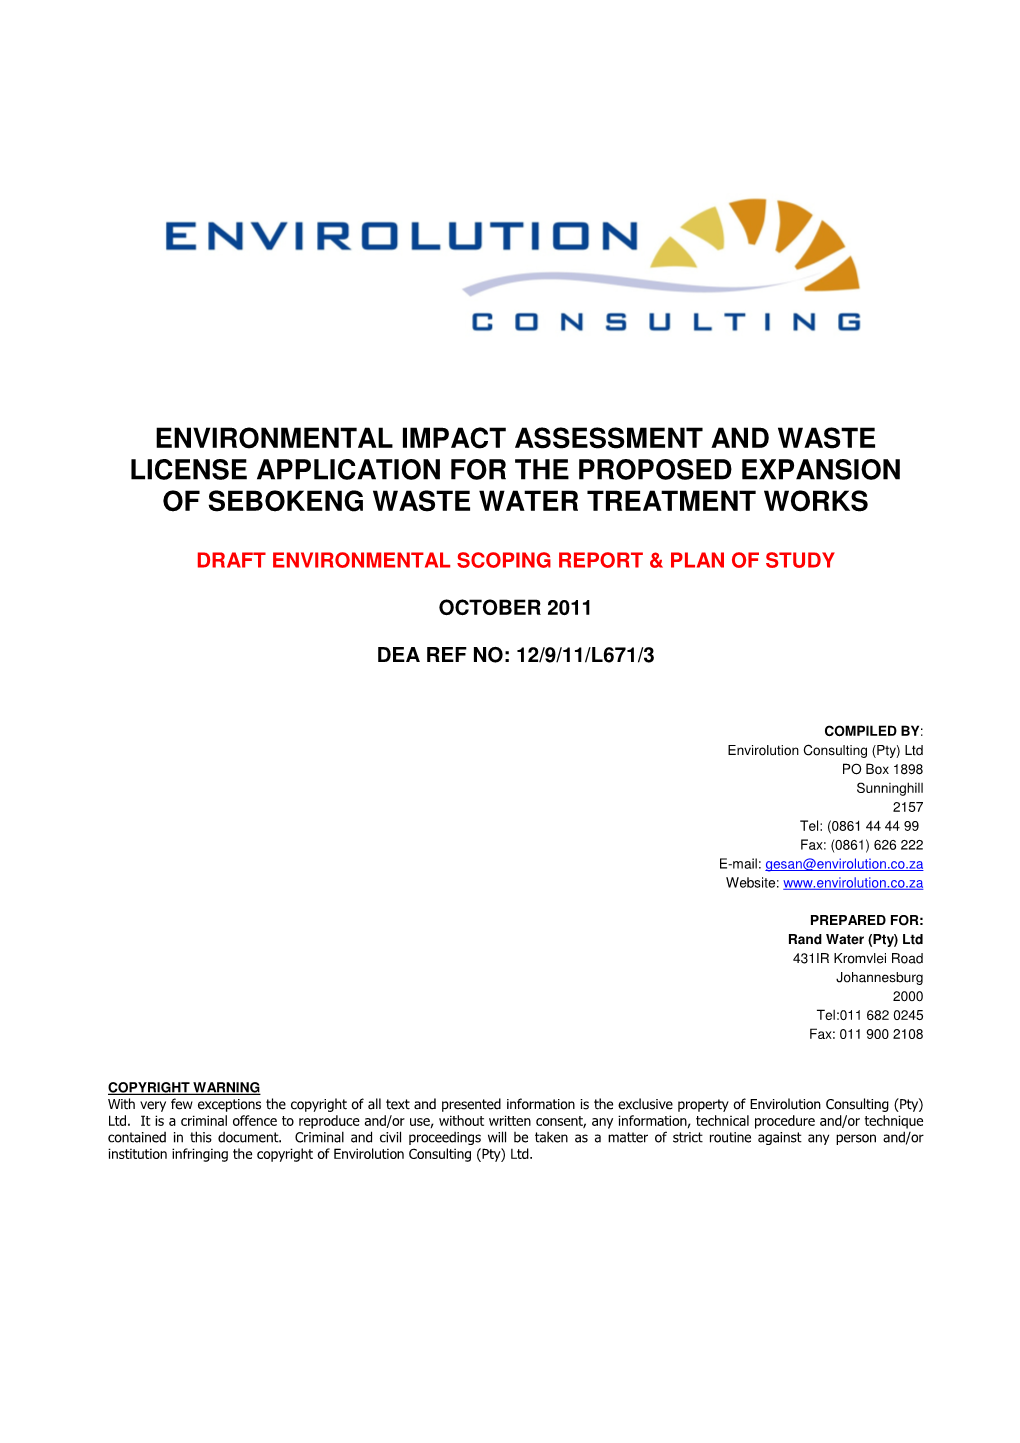 Environmental Impact Assessment and Waste License Application for the Proposed Expansion of Sebokeng Waste Water Treatment Works